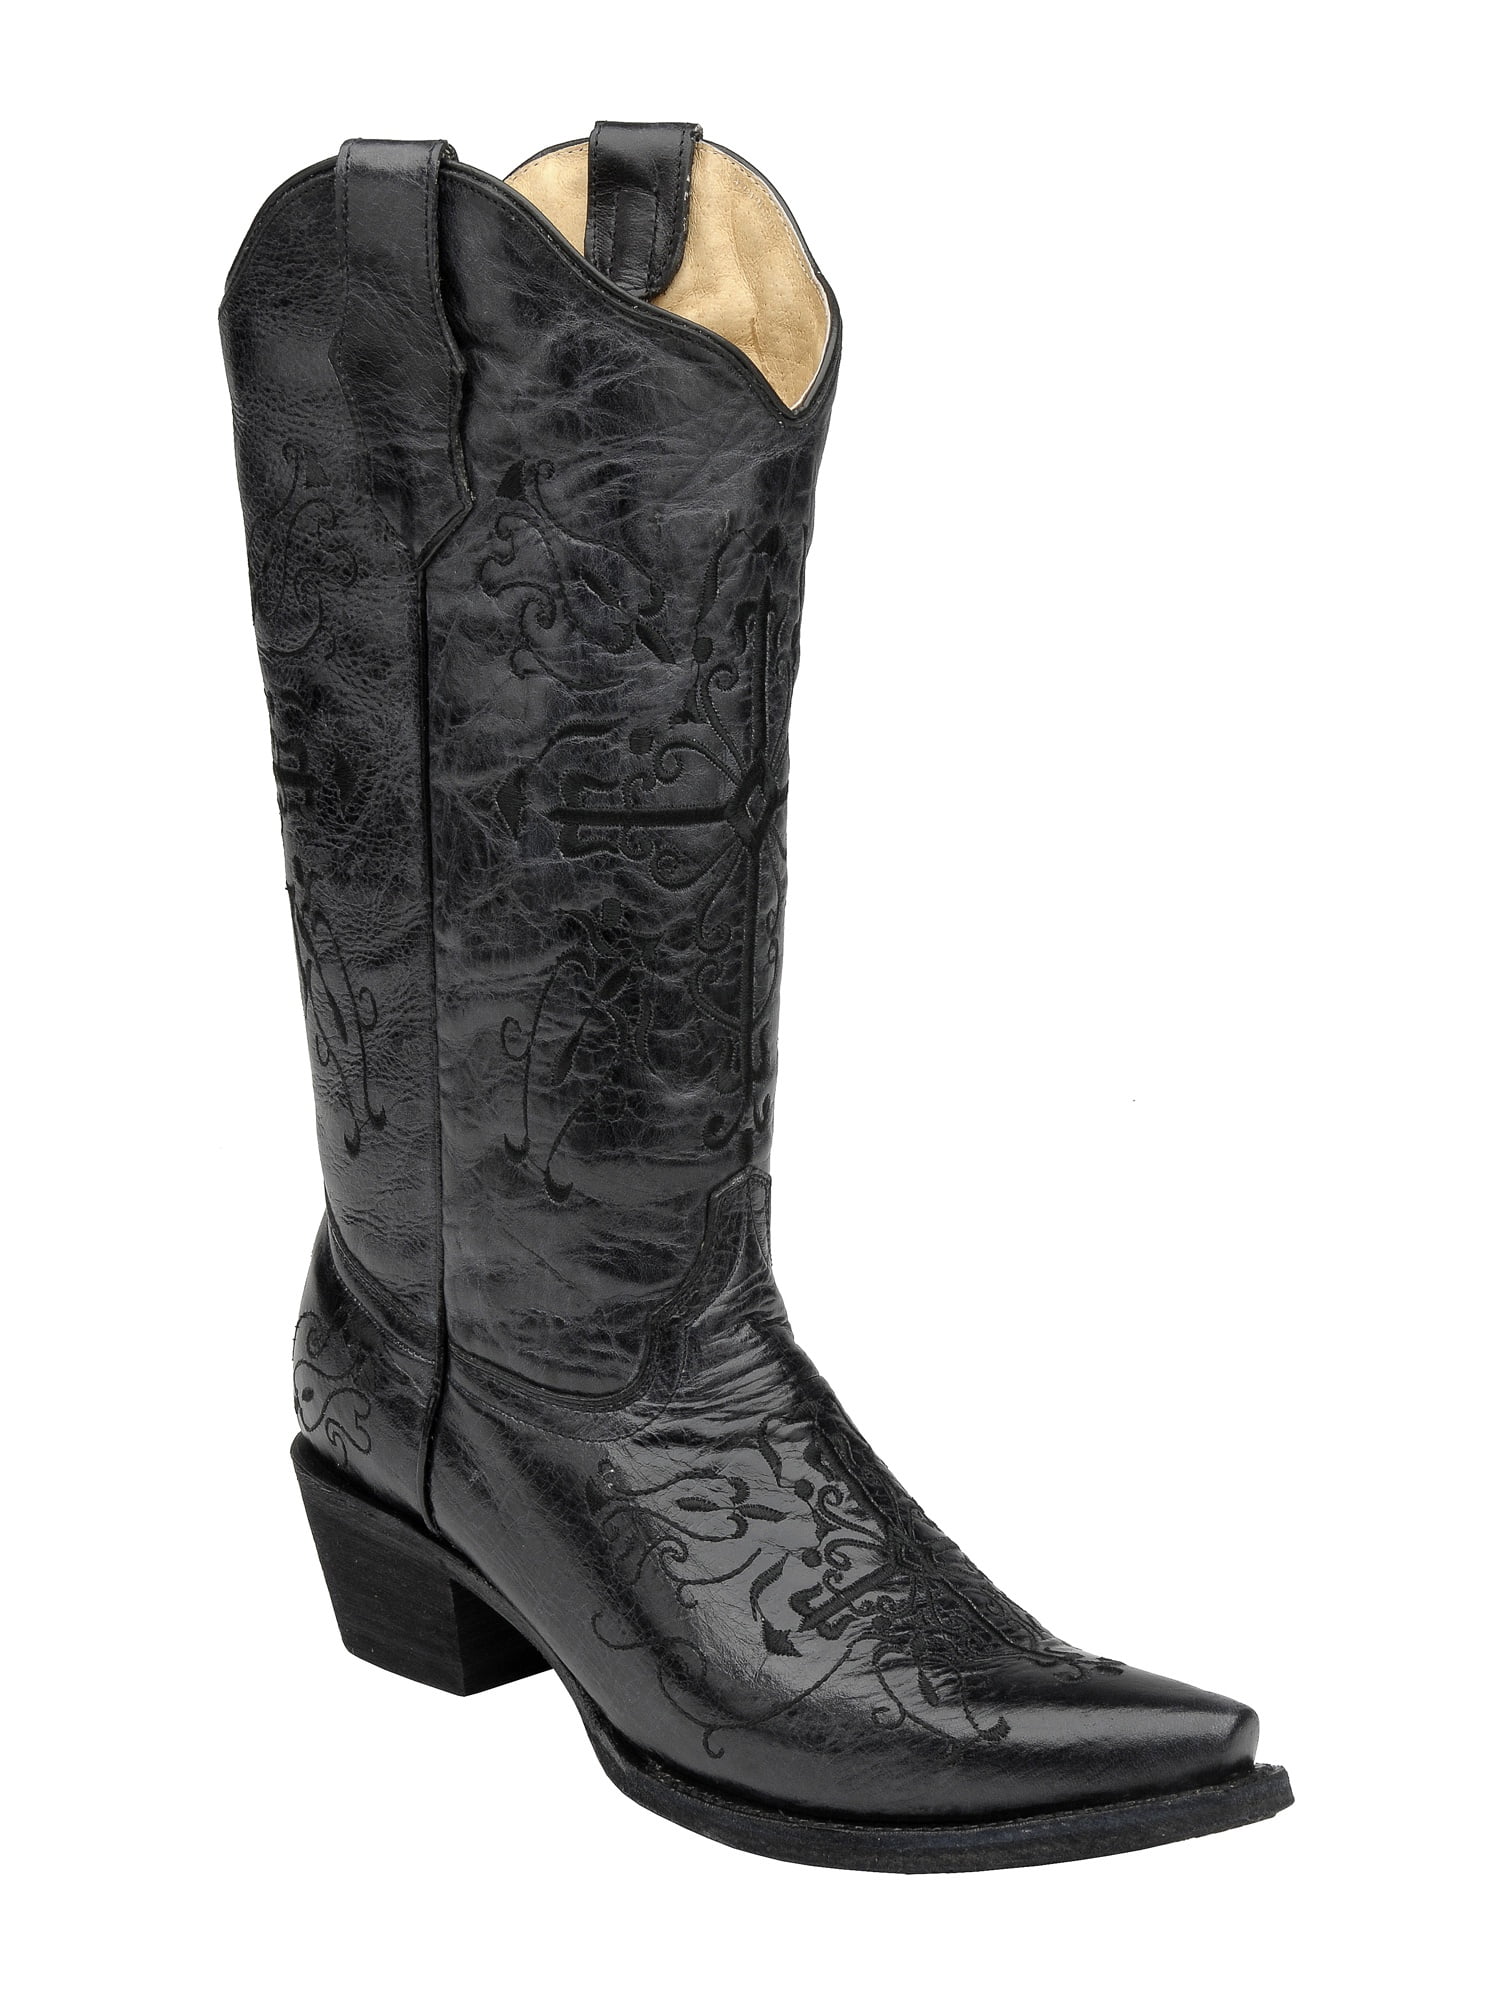 Corral Women's L5060 Cross Embroidery Black Snip Toe Western Boots 9 M ...